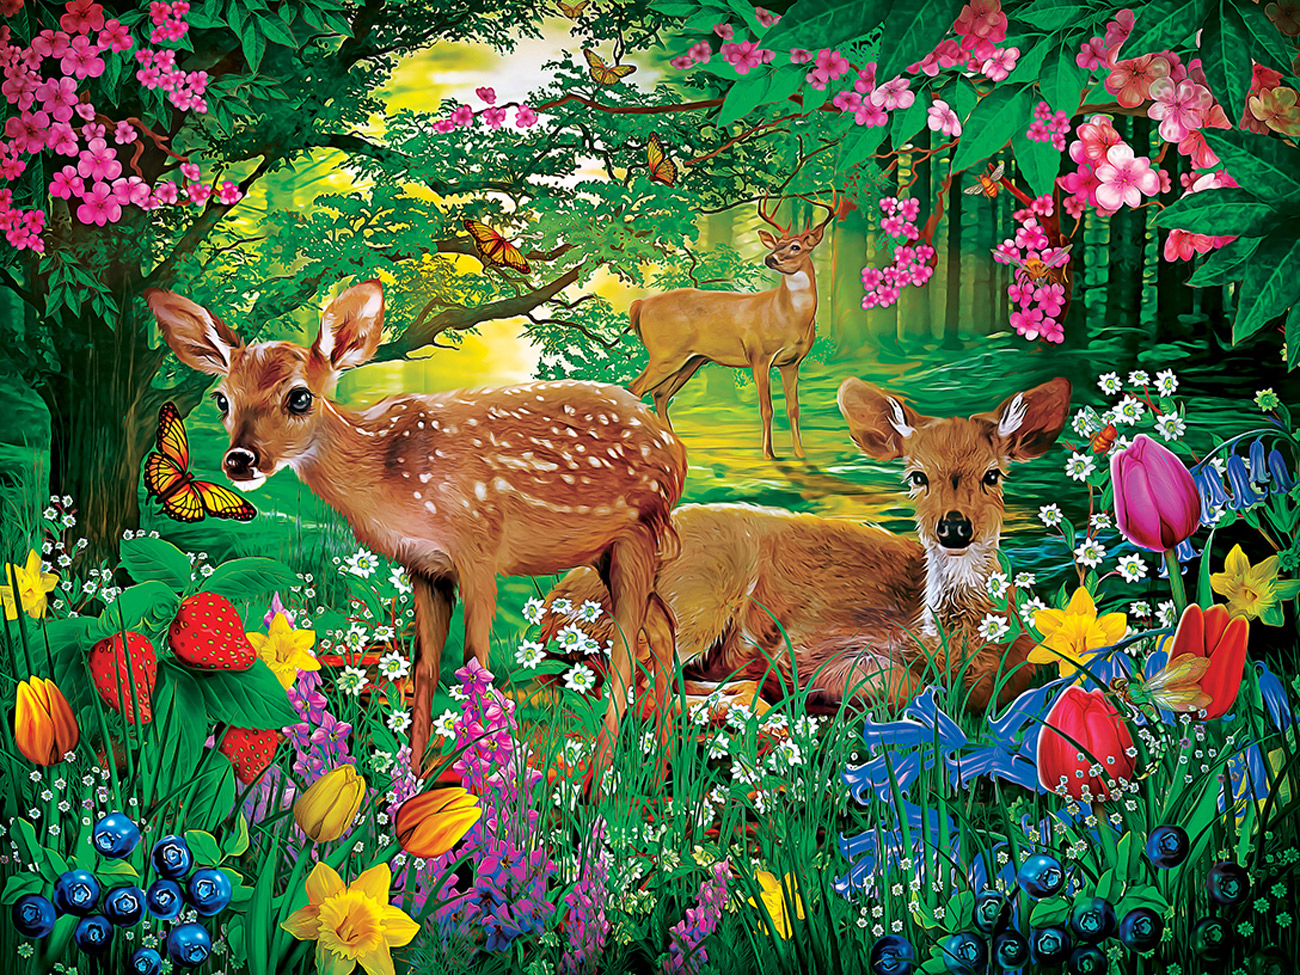 Spirit of Spring Forest Animal Jigsaw Puzzle